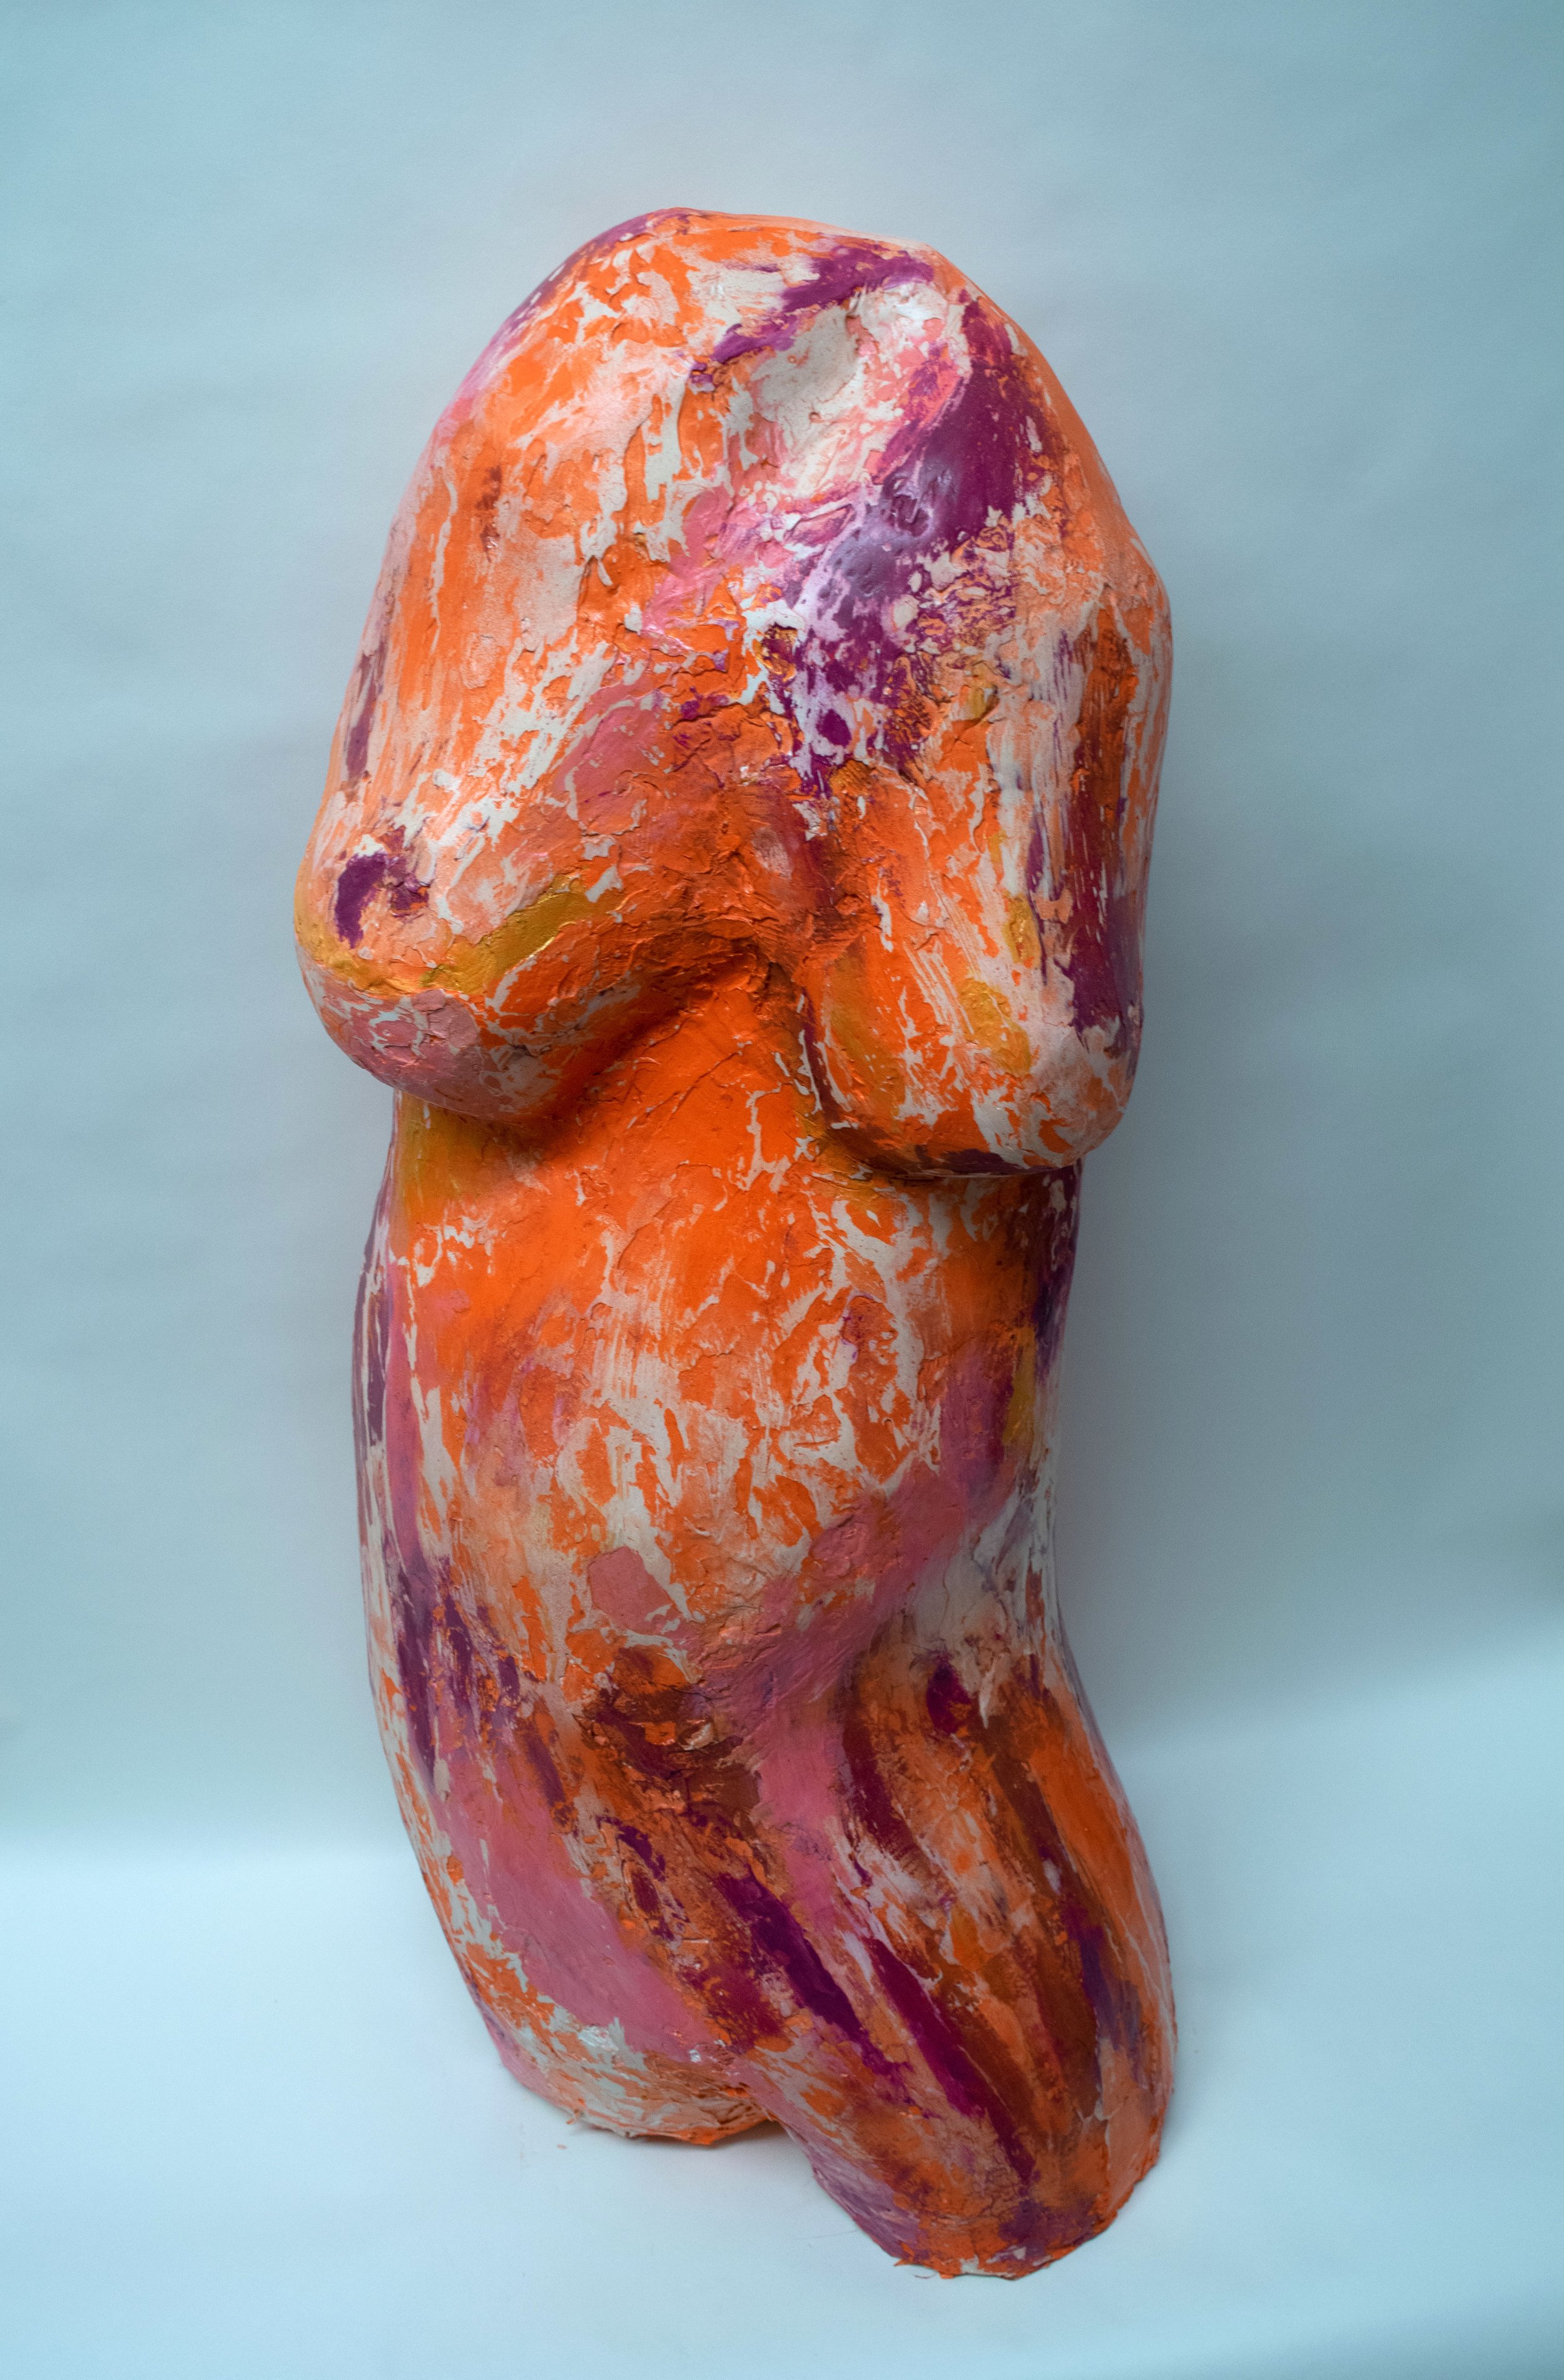    Ausra    spray foam, plaster, joint compound, acrylic paint, spray paint and polyurethane; 37.5" tall by 17" wide by 12" deep 